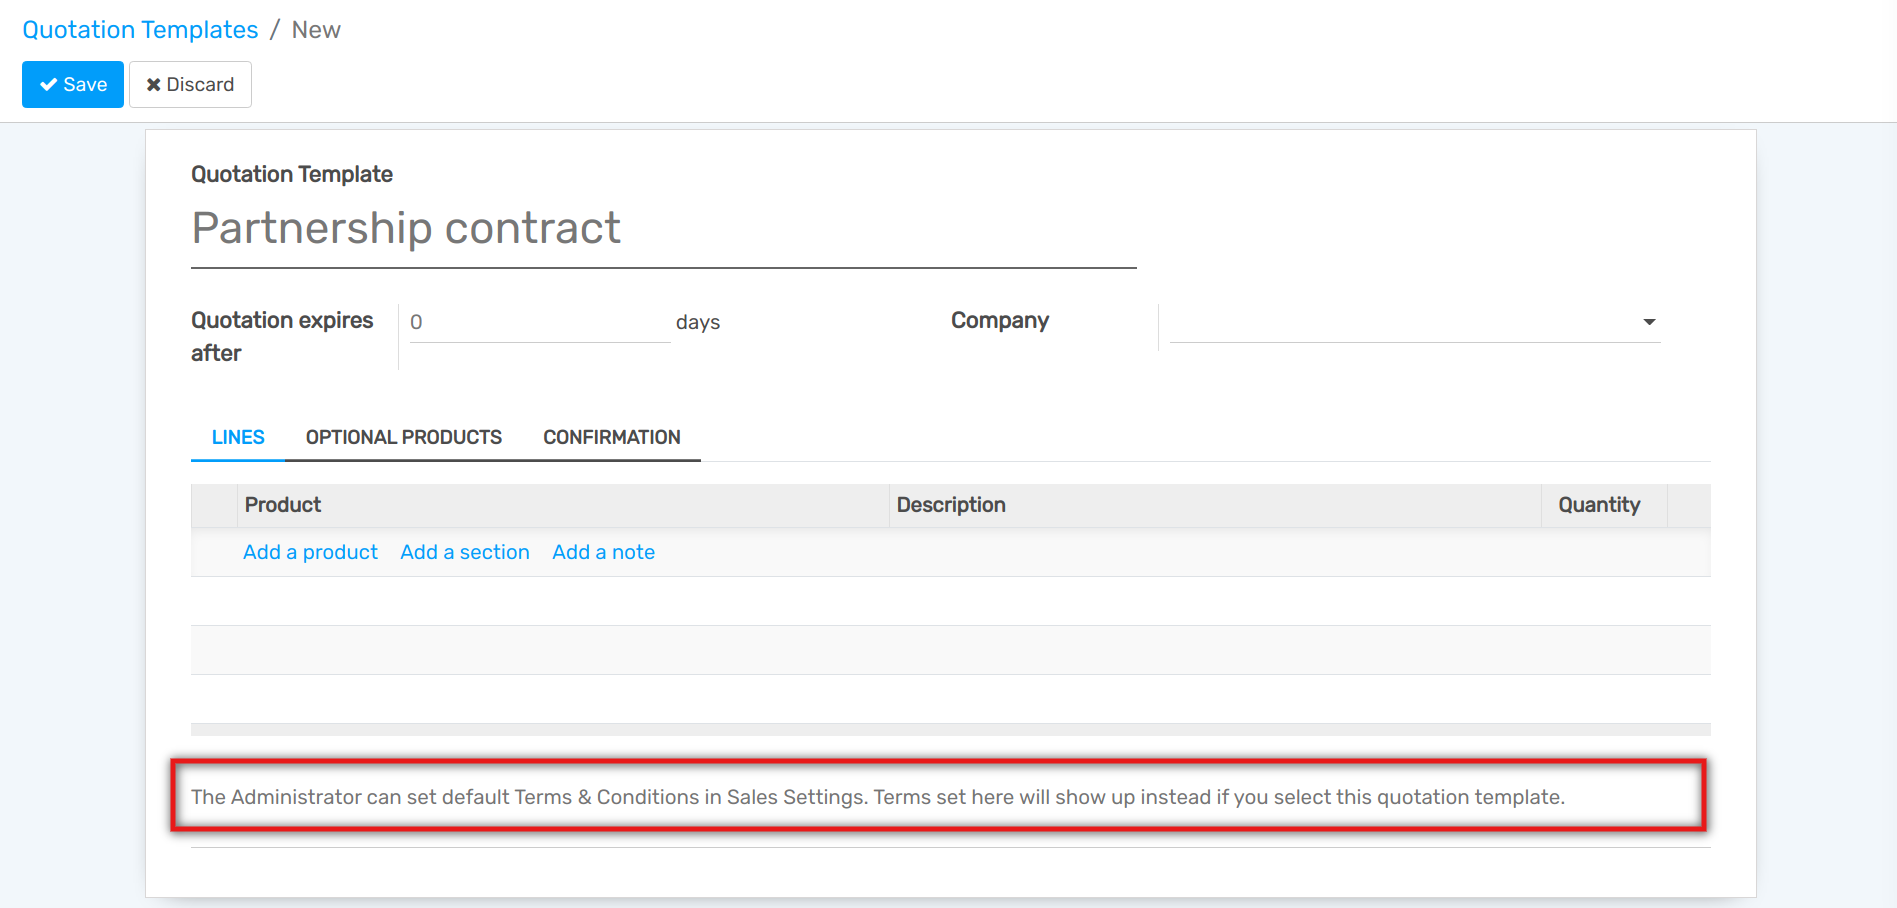 Add Default Terms & Conditions to your quotation templates on Flectra Sales